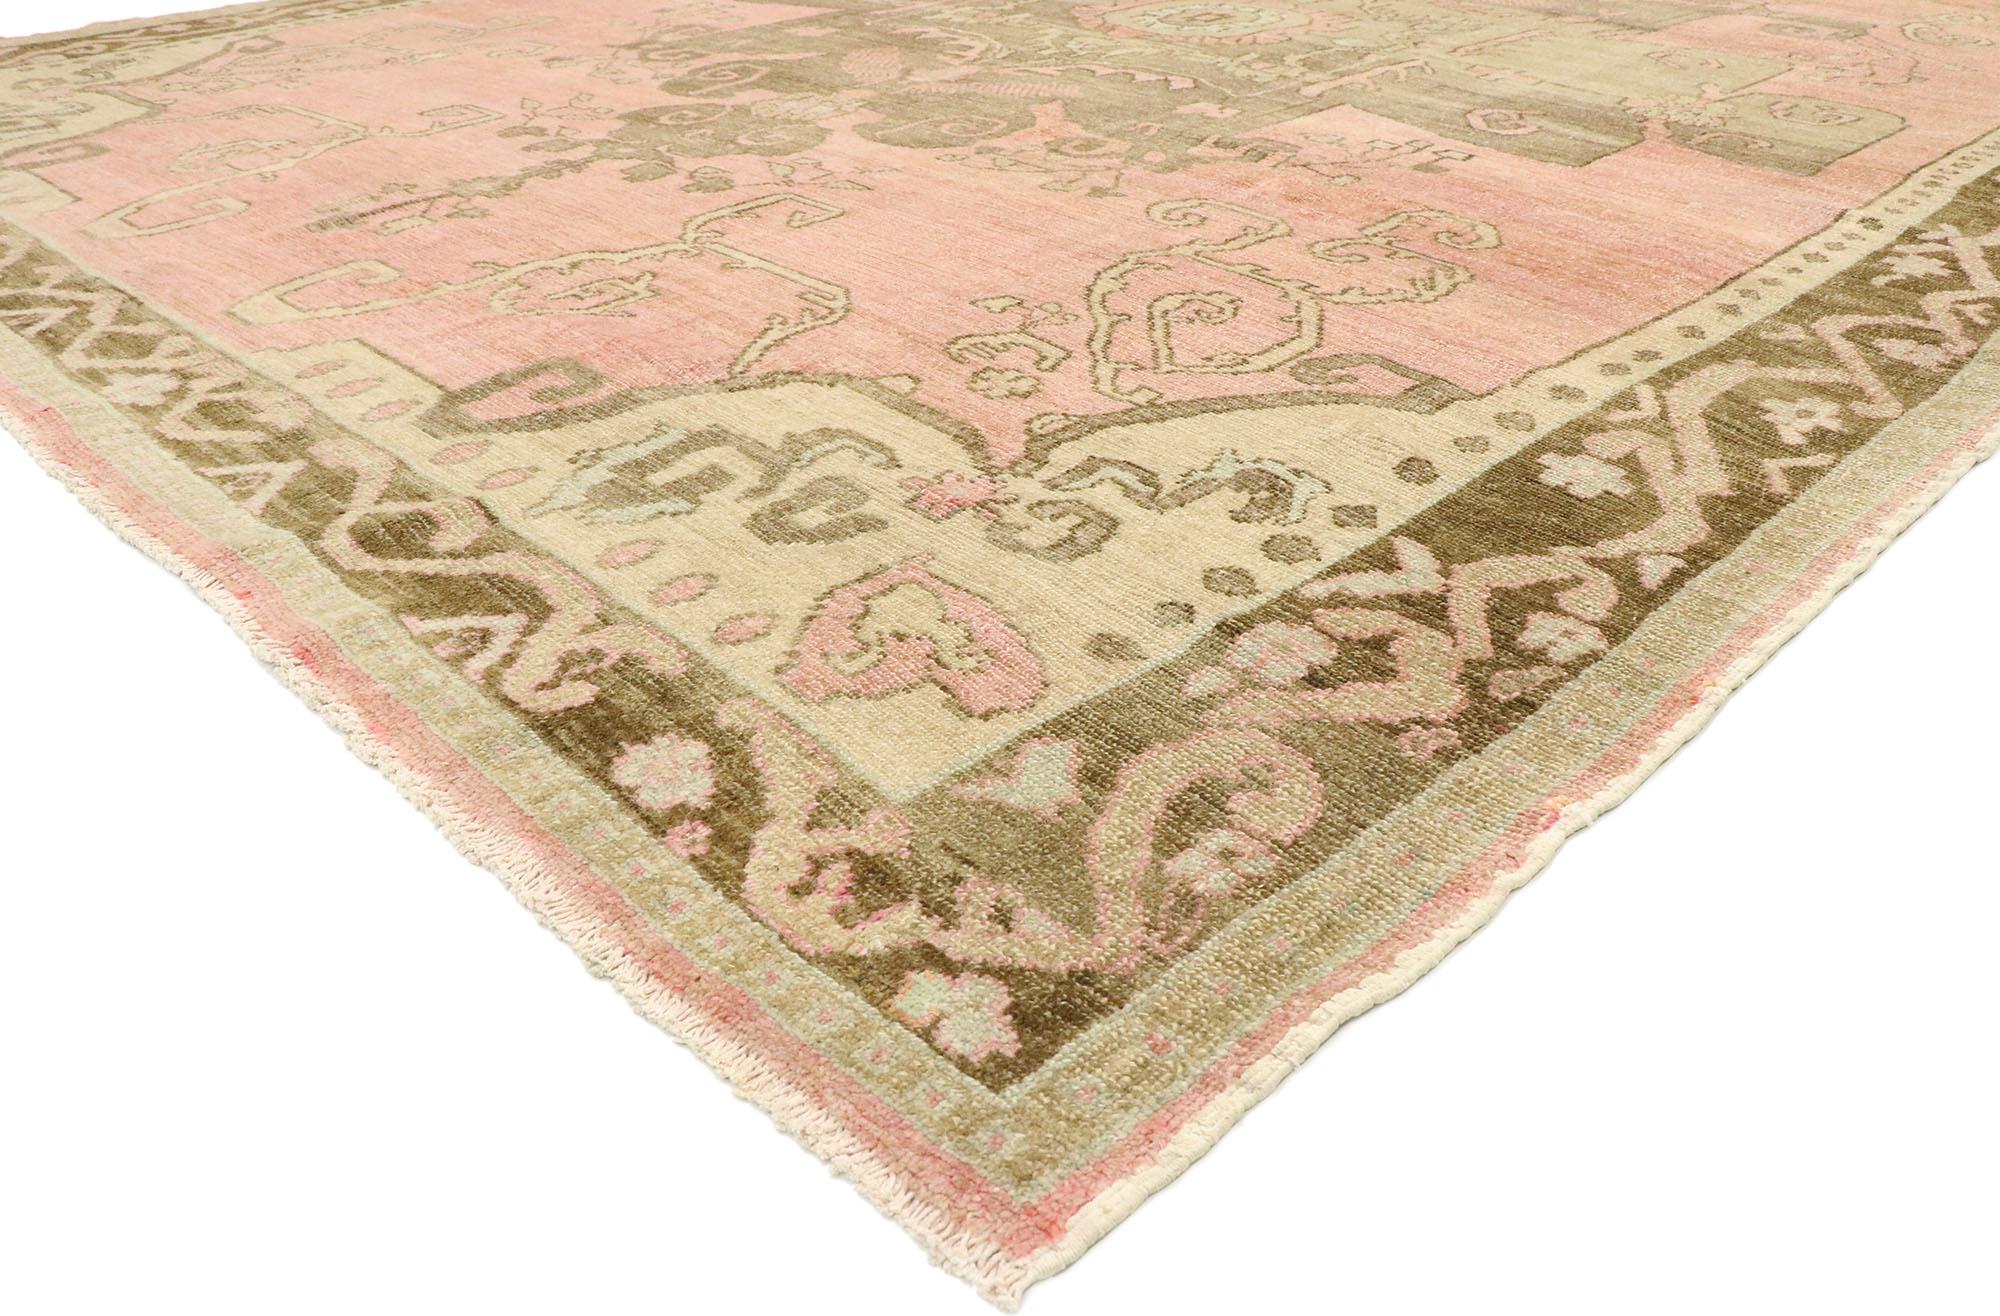 53020 vintage Turkish Kars rug with Romantic Mid-Century Modern style. Effortless beauty and feminine connotations meet soft, bespoke vibes with a romantic Mid-Century Modern style in this hand knotted wool vintage Turkish Kars rug. The antique